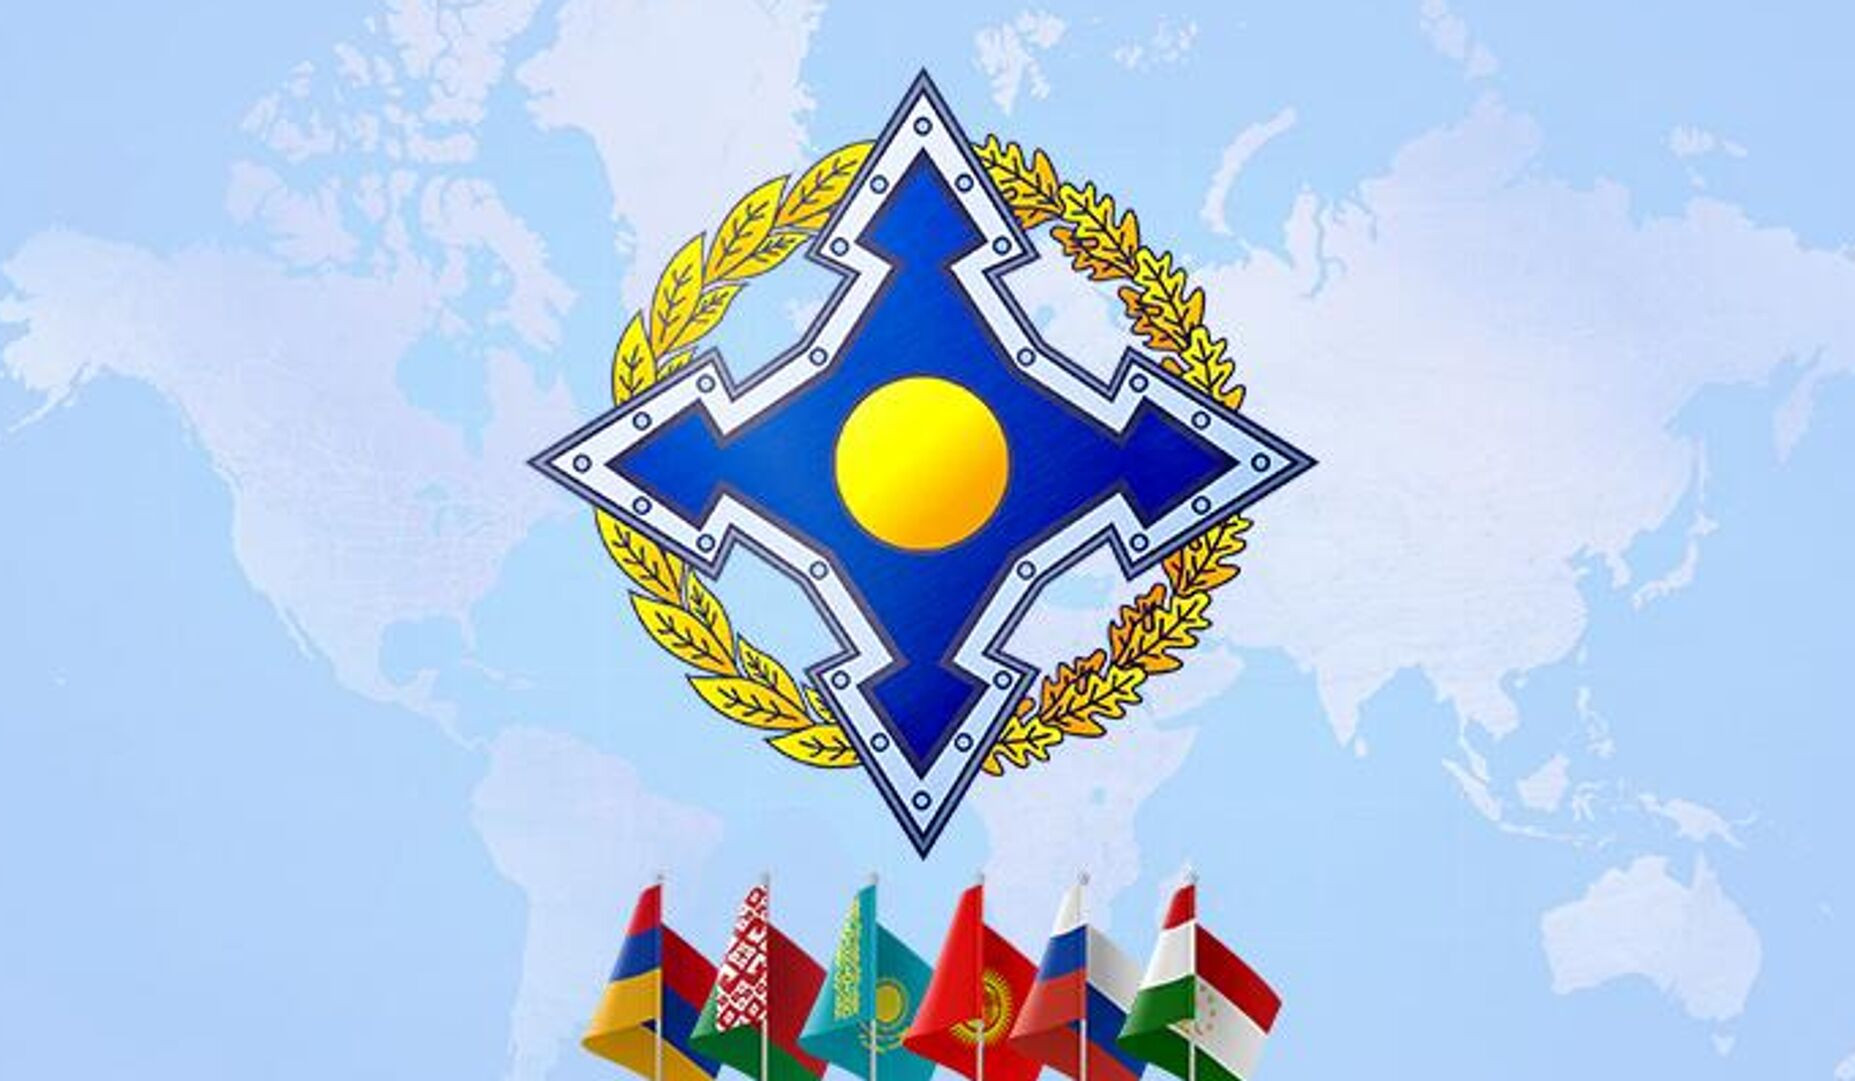 CSTO works on holding drills in other member states